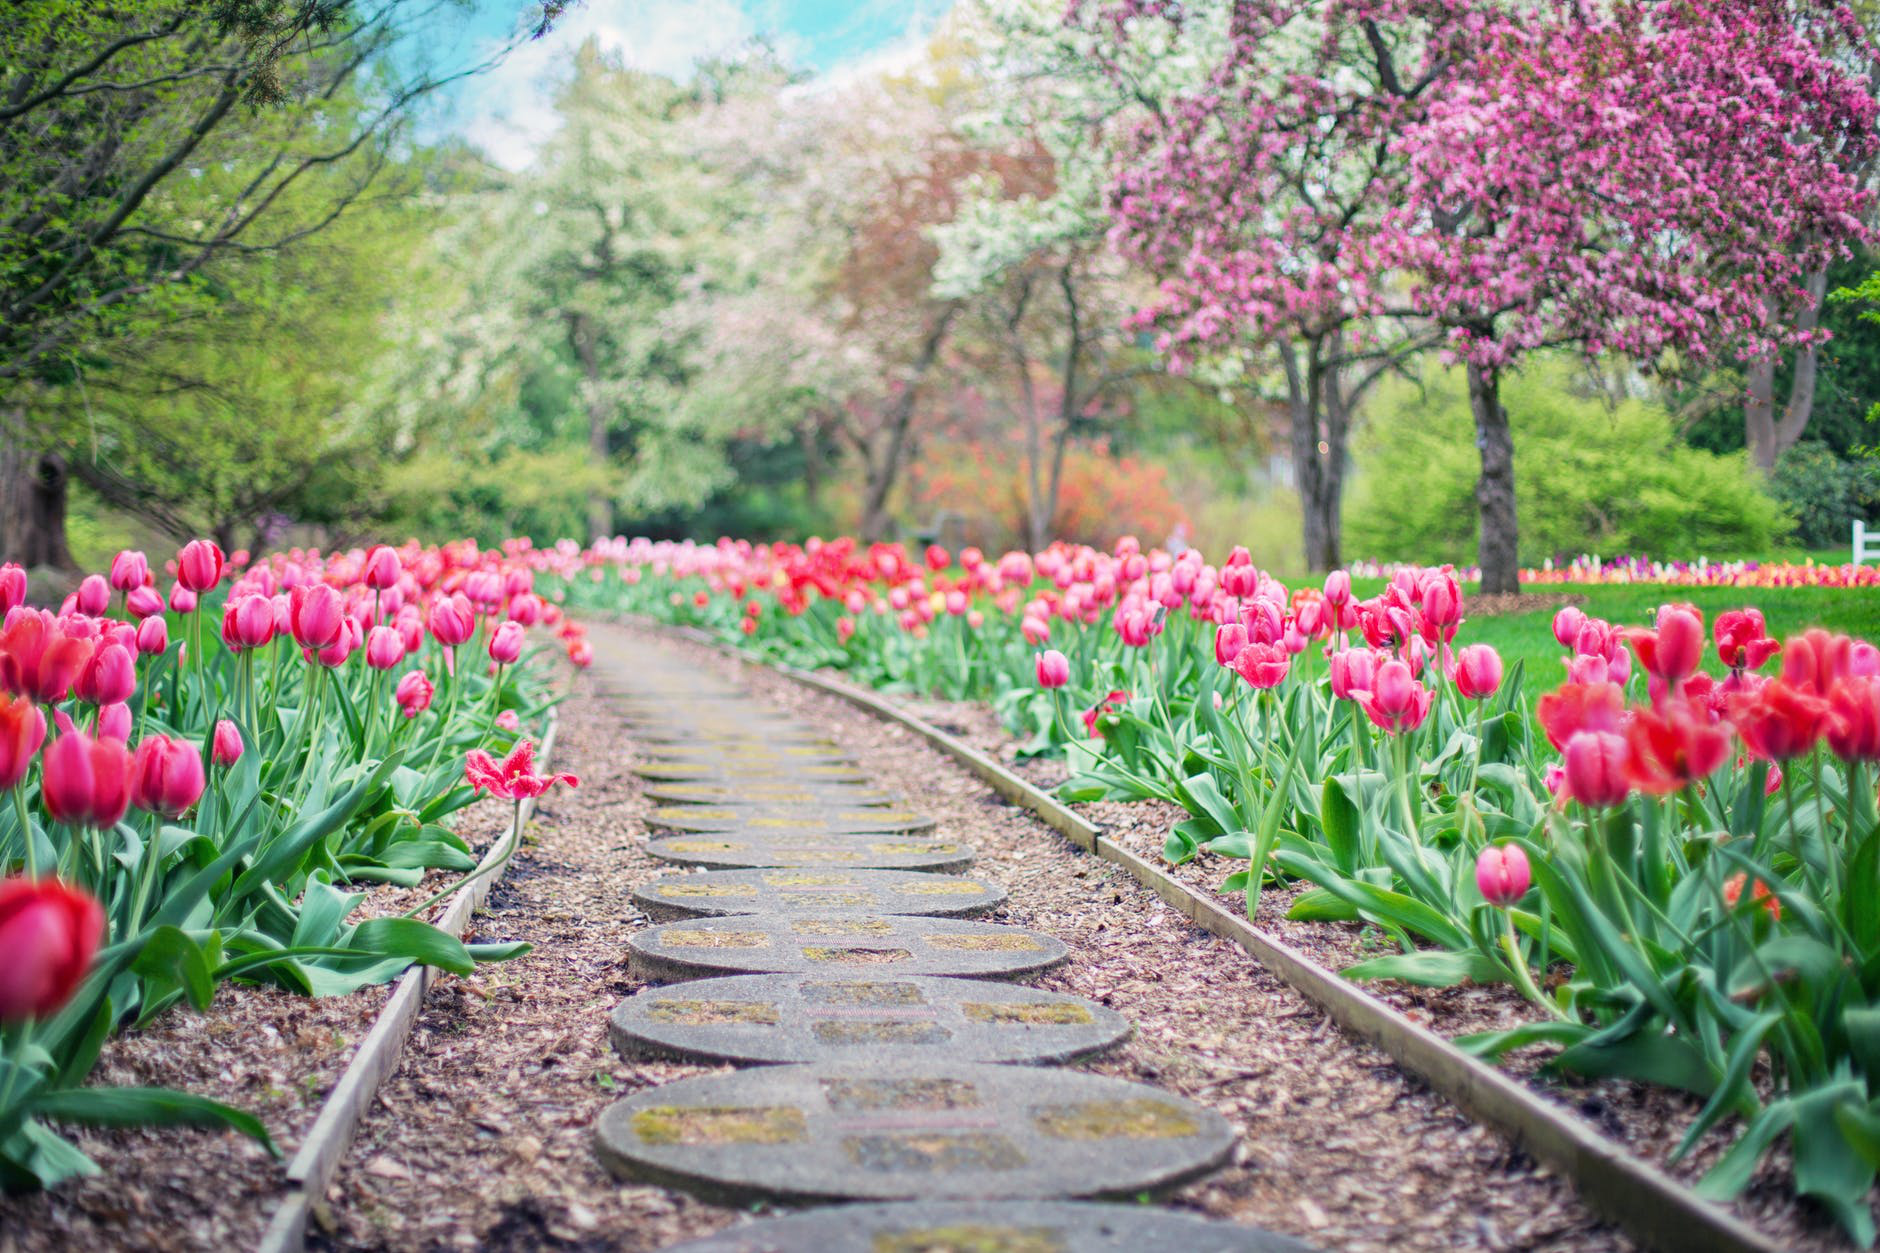 Tulips lining a paver walkway with edging